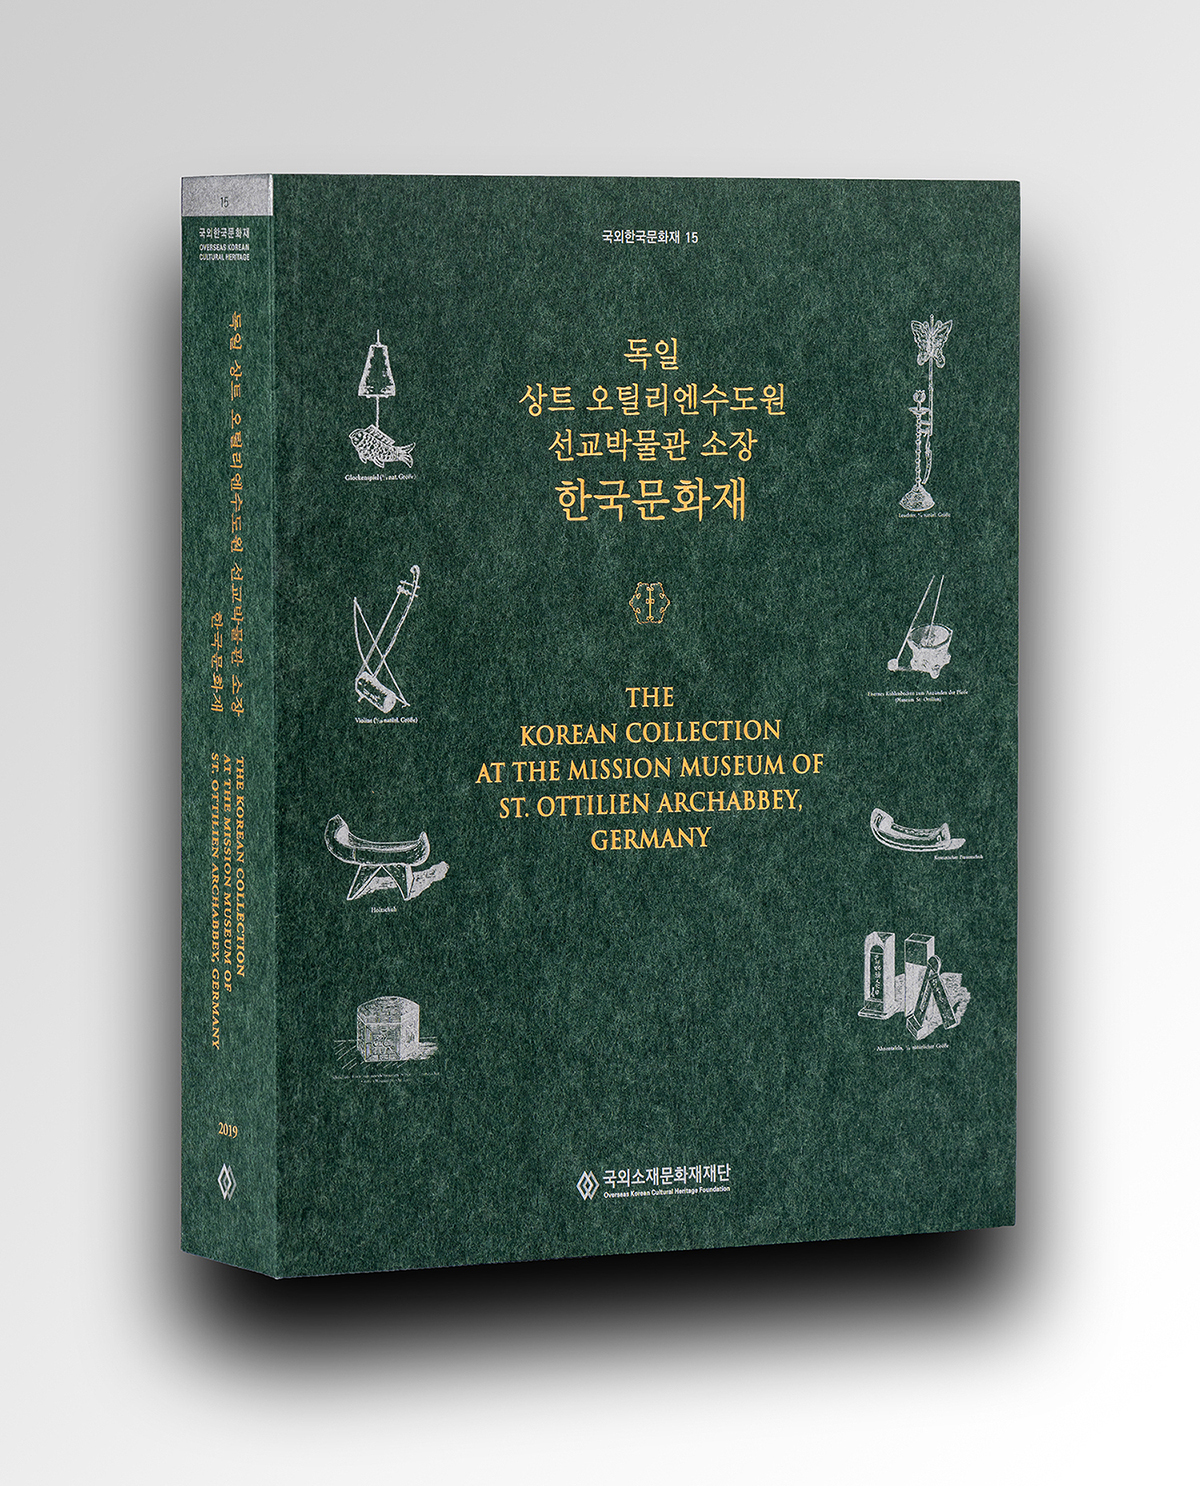 A cover of report “The Korean Collection at the Mission Museum of St. Ottilien Archabbey“(Overseas Korean Cultural Heritage Foundation)